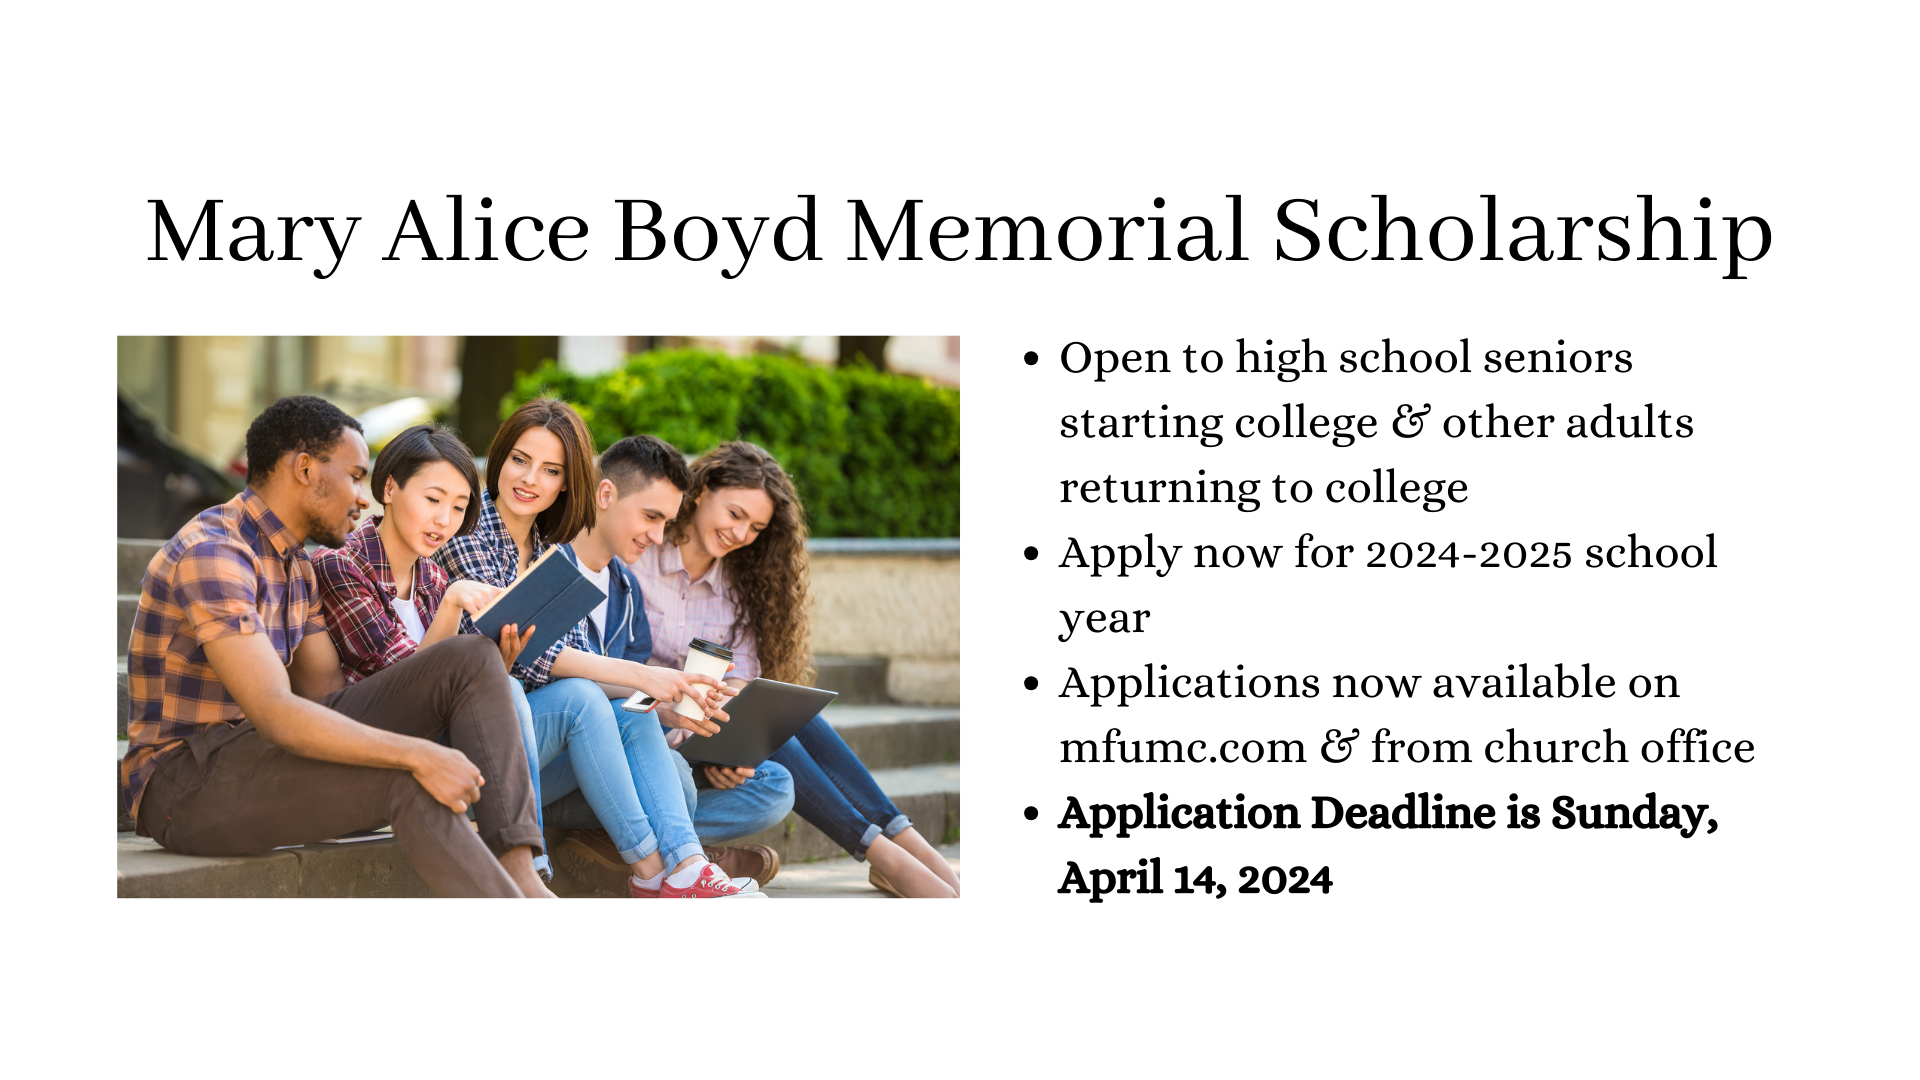 Attention Applicants for the Mary Alice Boyd Memorial Scholarship